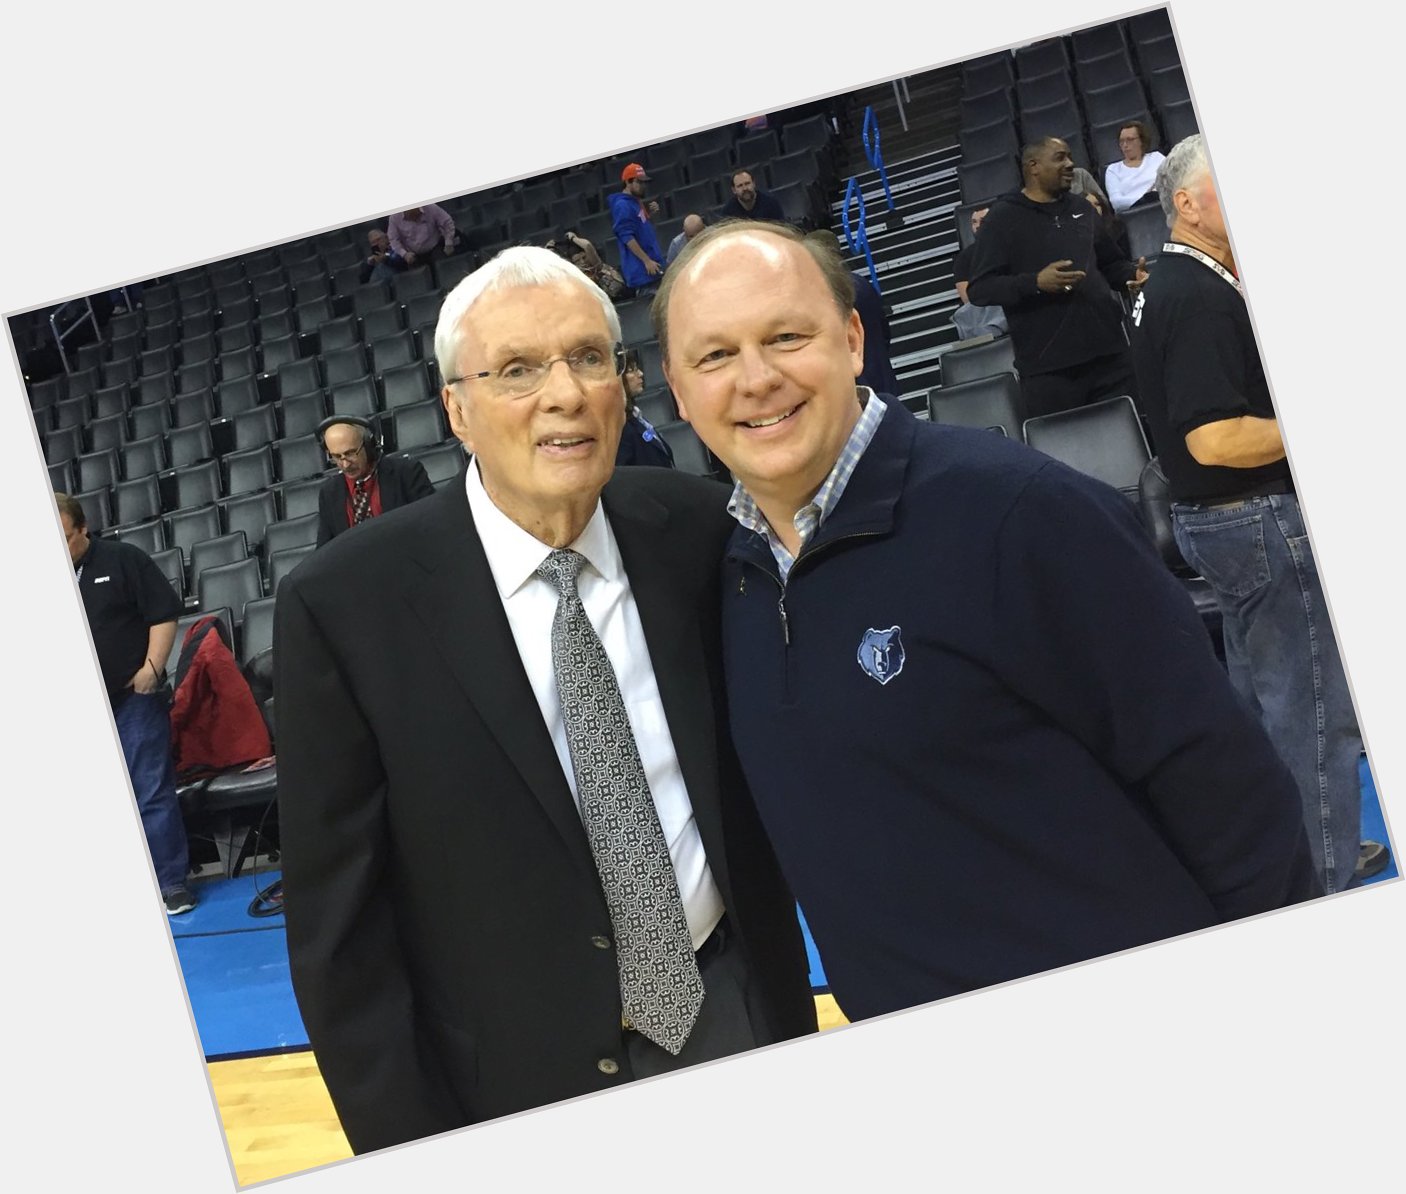 Happy Birthday to the Hall of Famer Hubie Brown. I admire his detailed preparation and ability to teach the game. 